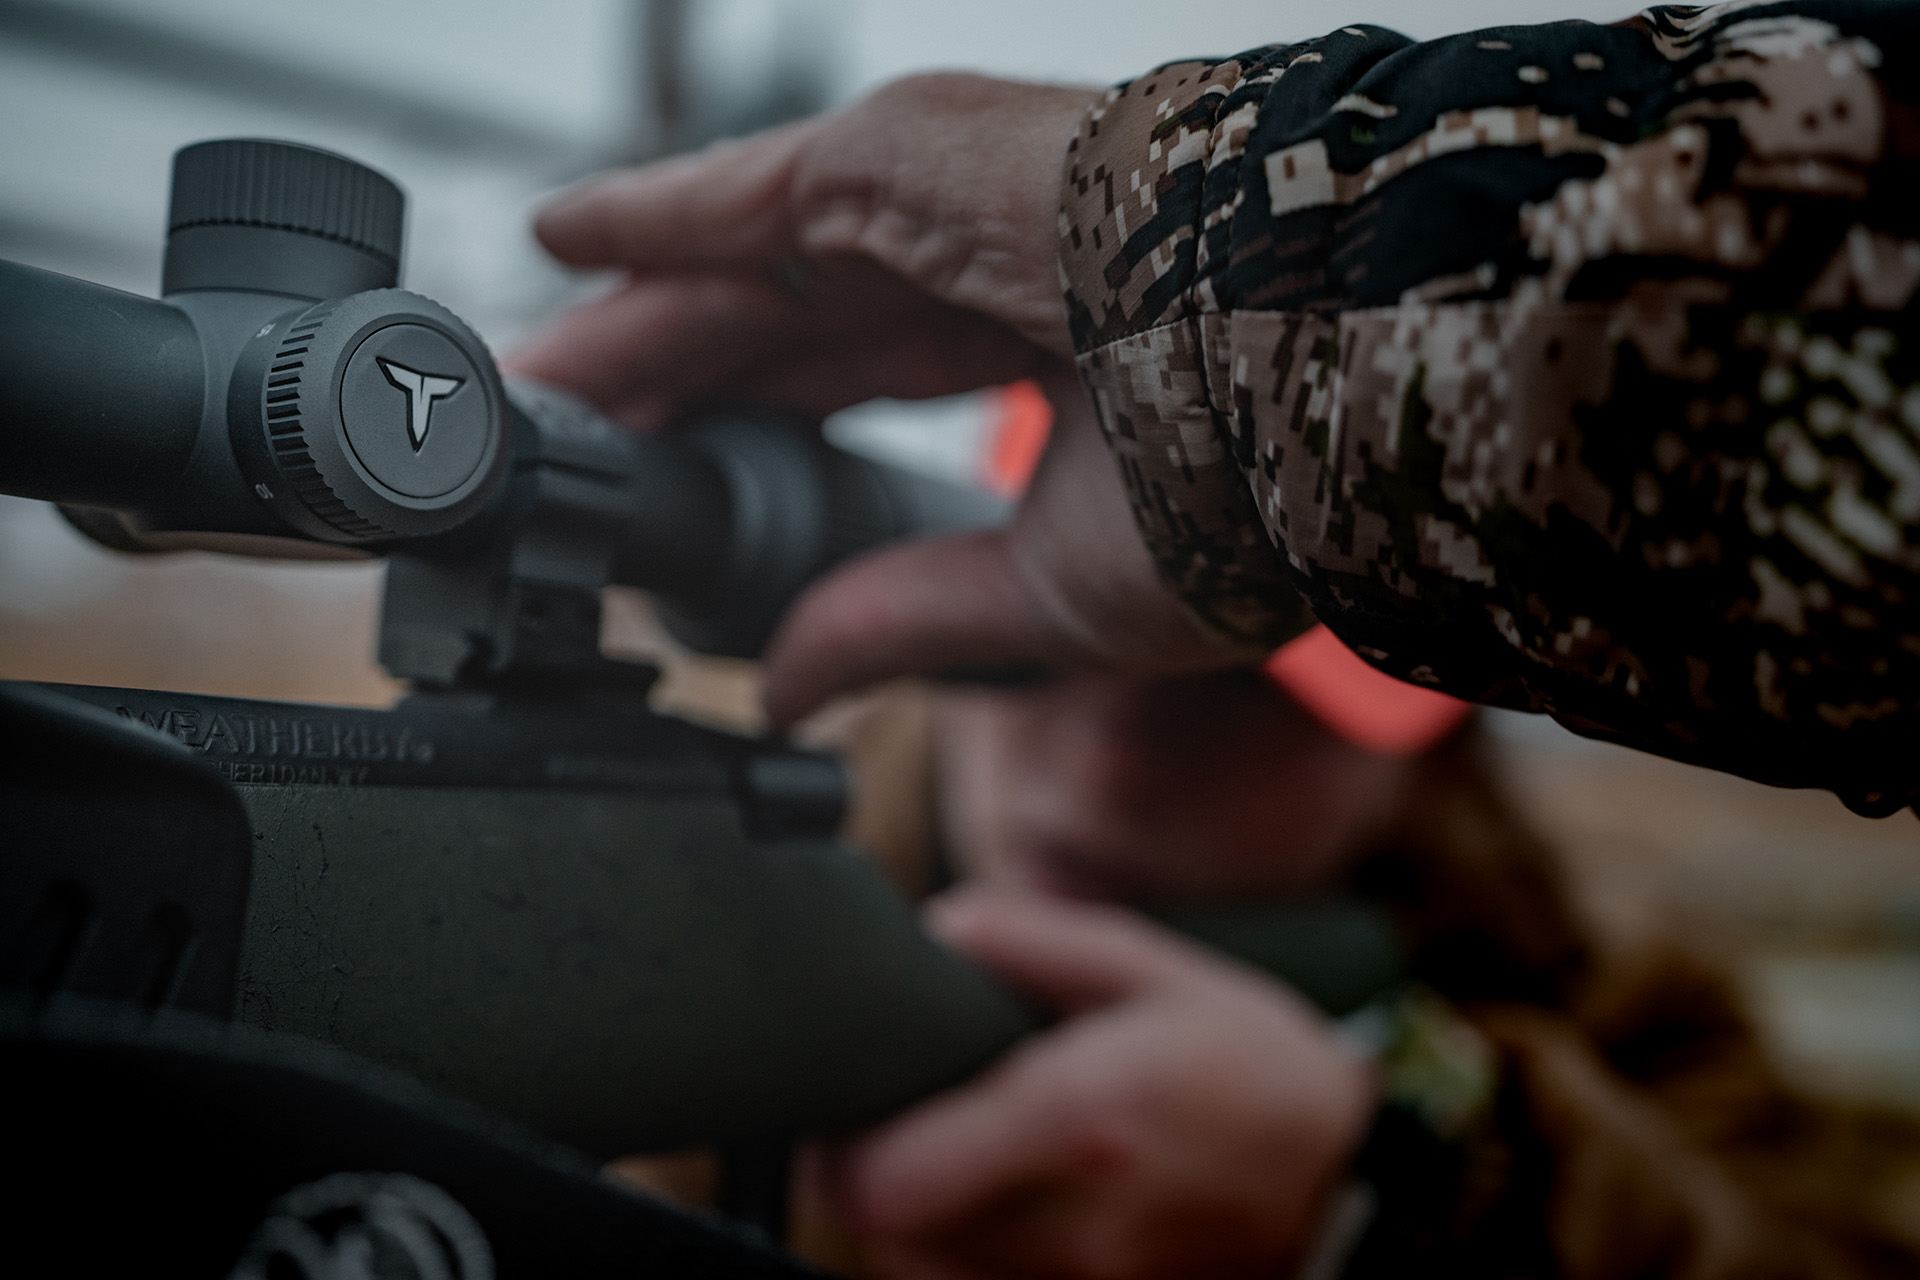 Finding the right rifle scope is a big deal, especially if you're new to hunting. Read on to learn about magnification, objective lenses, windage and elevation turrets, and more.